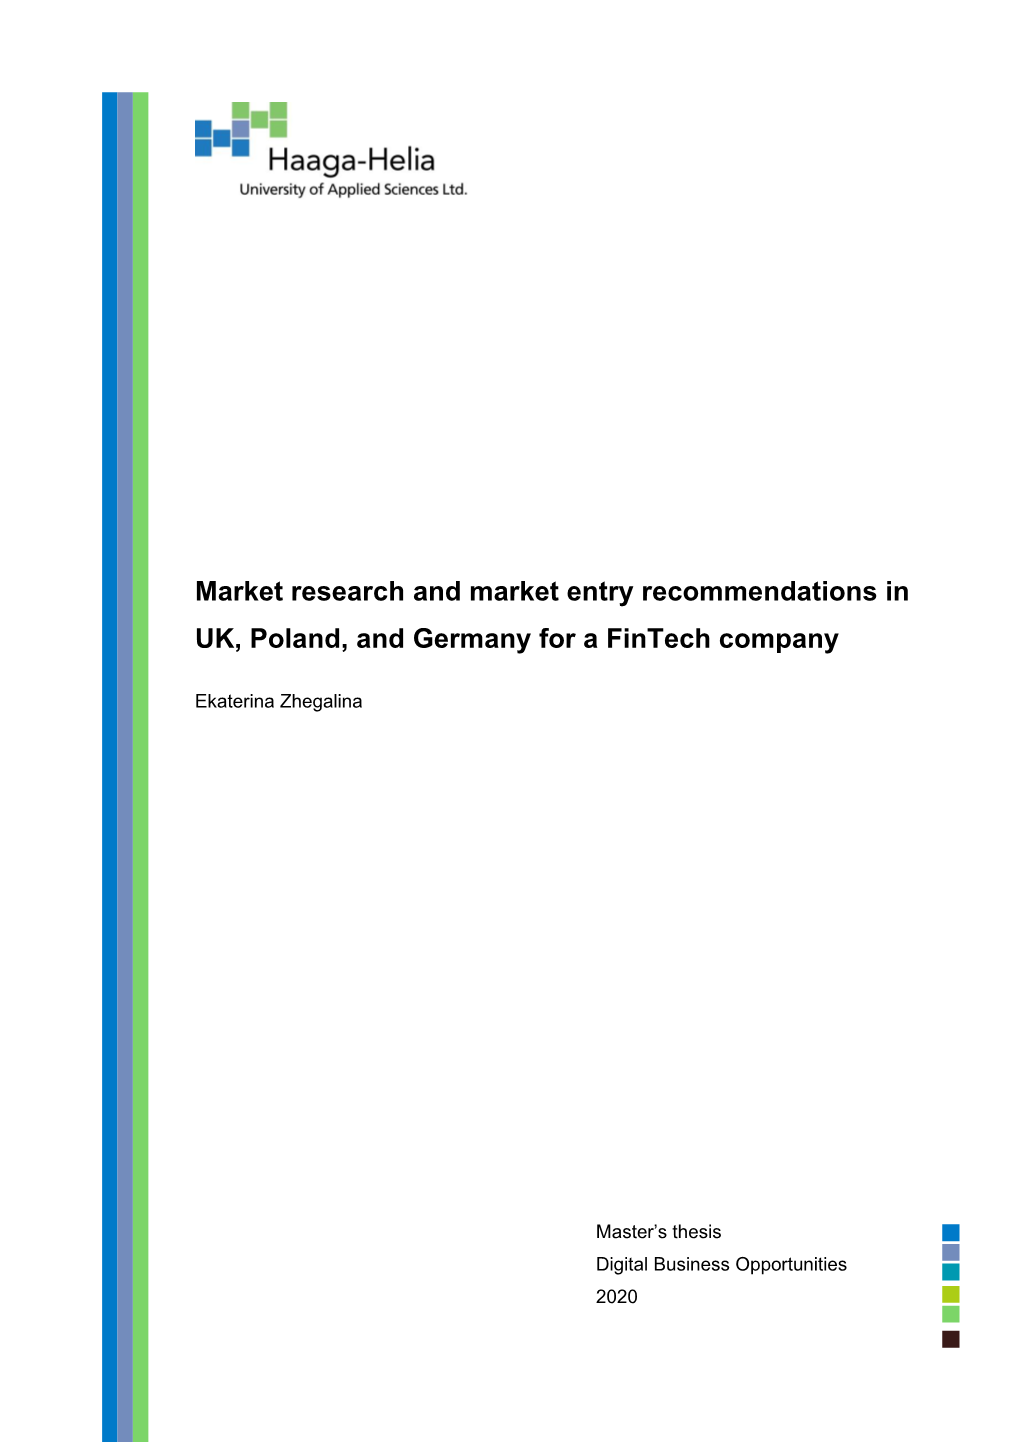 Market Research and Market Entry Recommendations in UK, Poland, and Germany for a Fintech Company